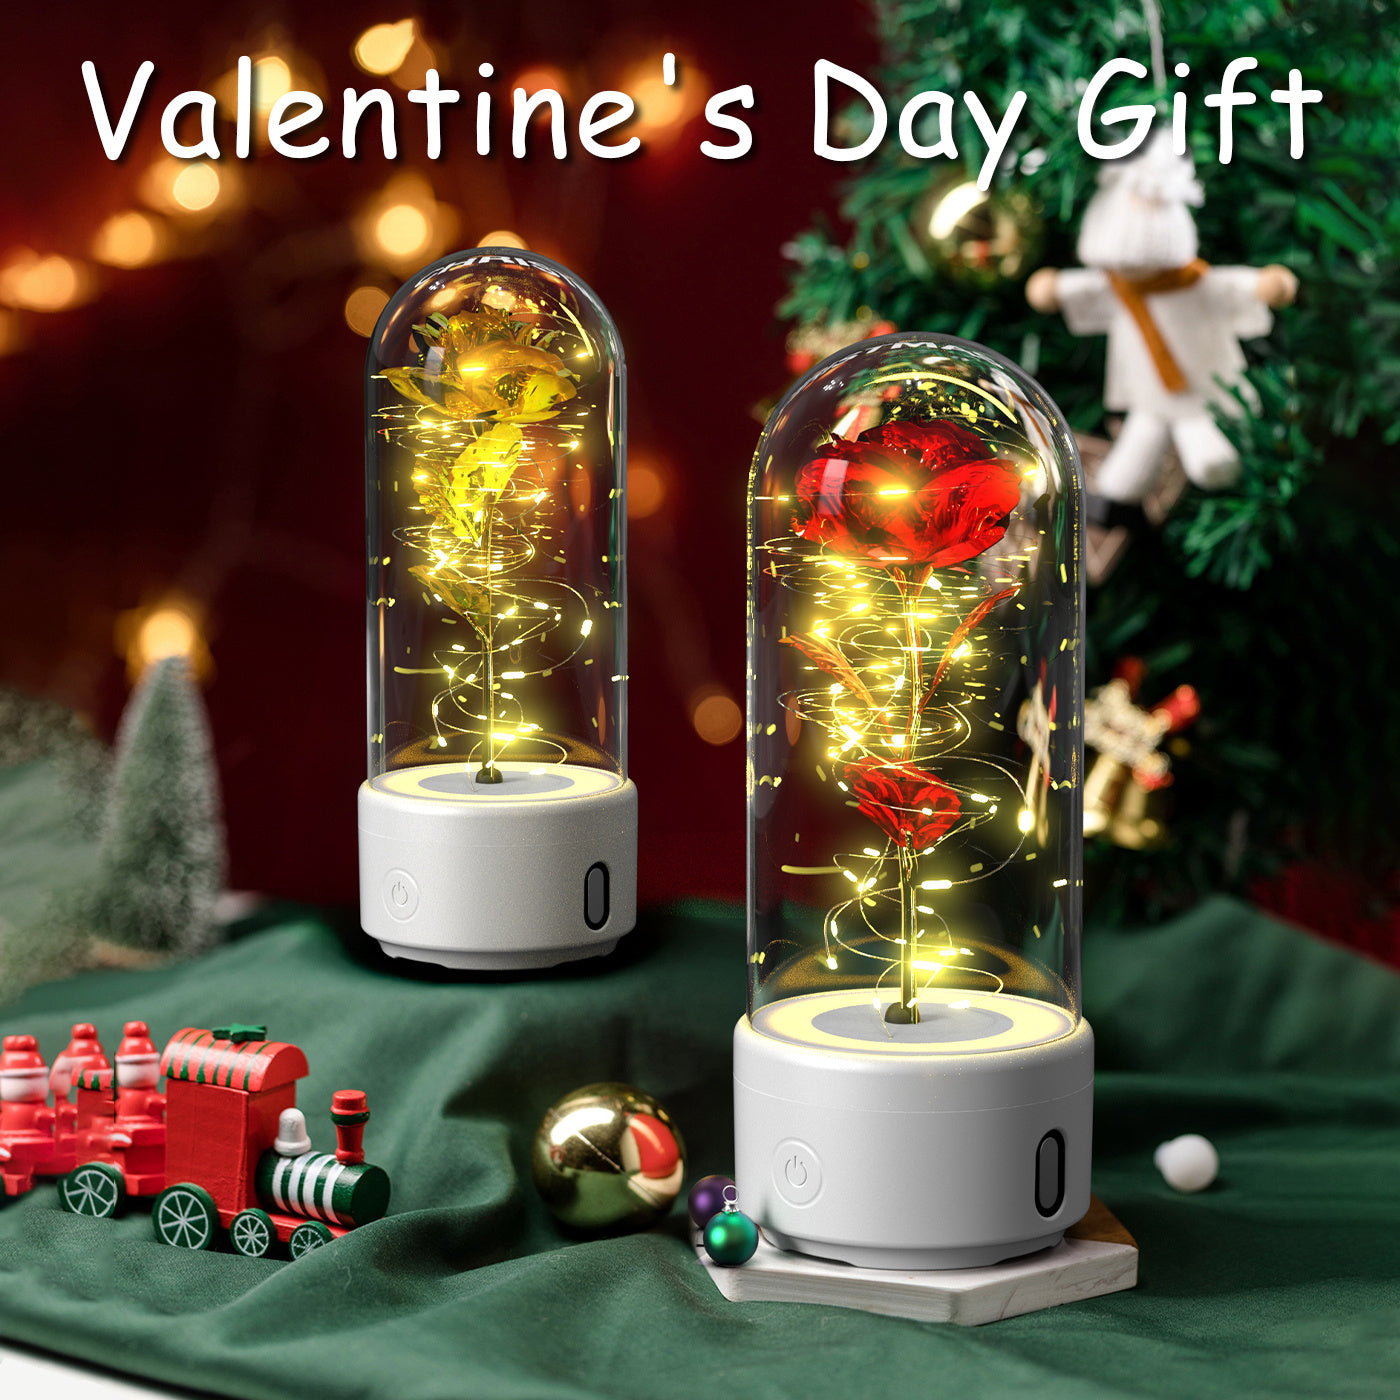 A unique gift that combines an LED light and a Bluetooth speaker with rose flowers. Glass-covered Rose Luminous Night Light Ornament